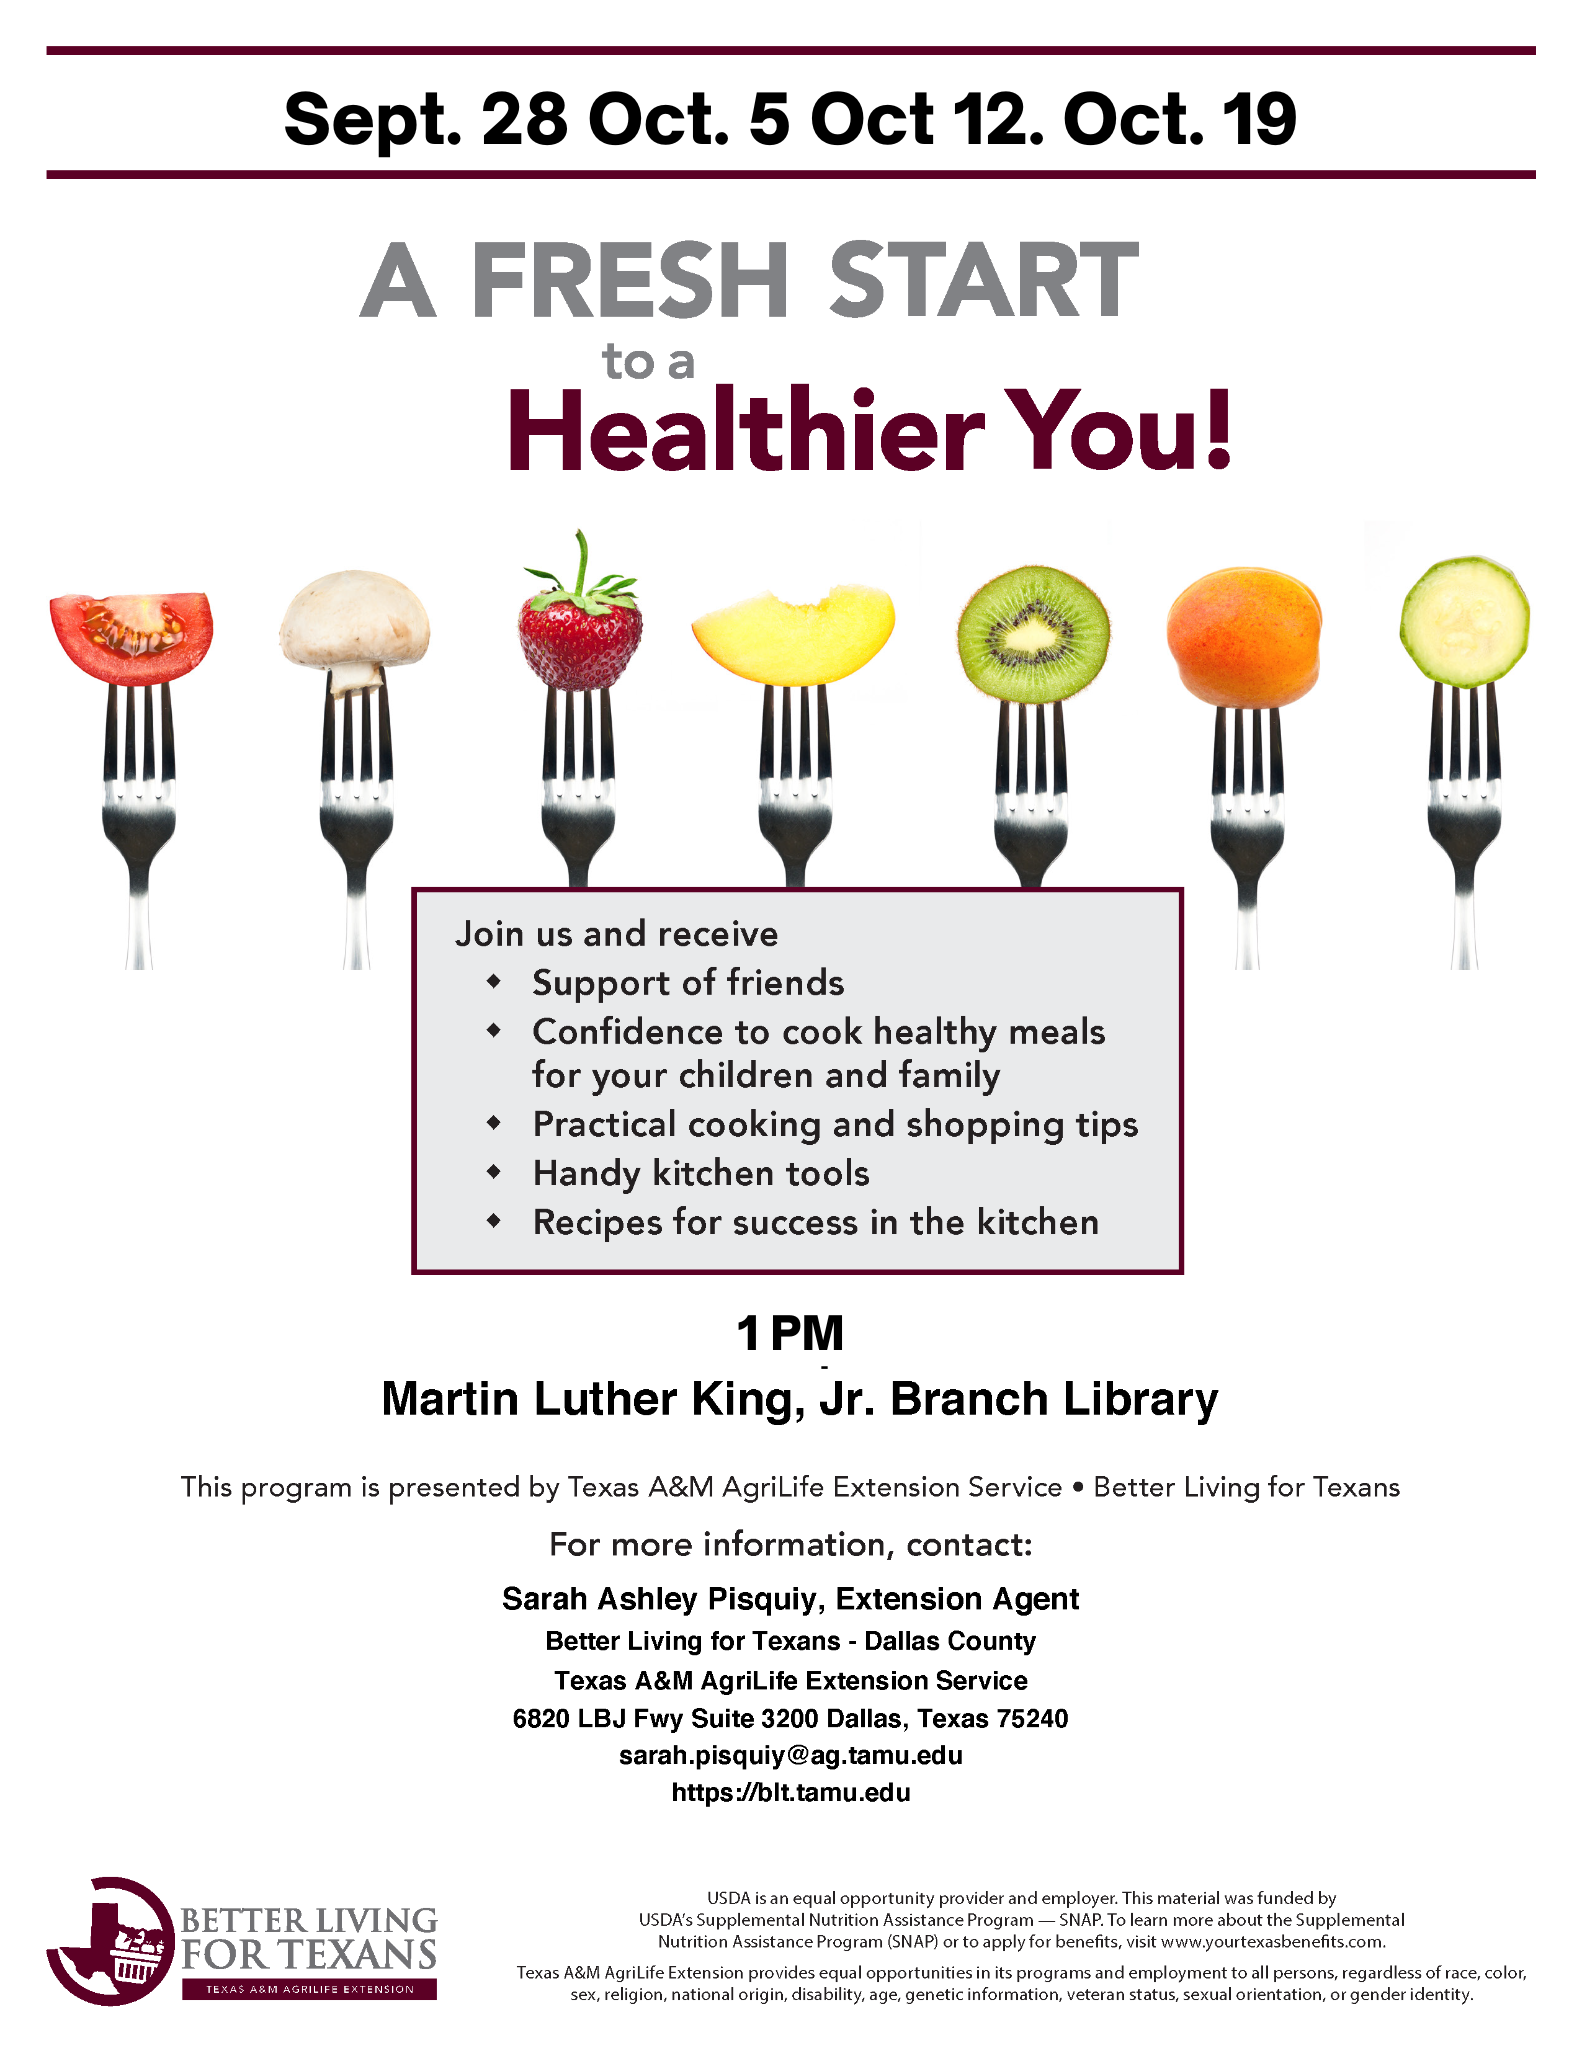 A Fresh Start to A Healthier You! is a 4 session educational course to learn more about healthy and practical cooking practices